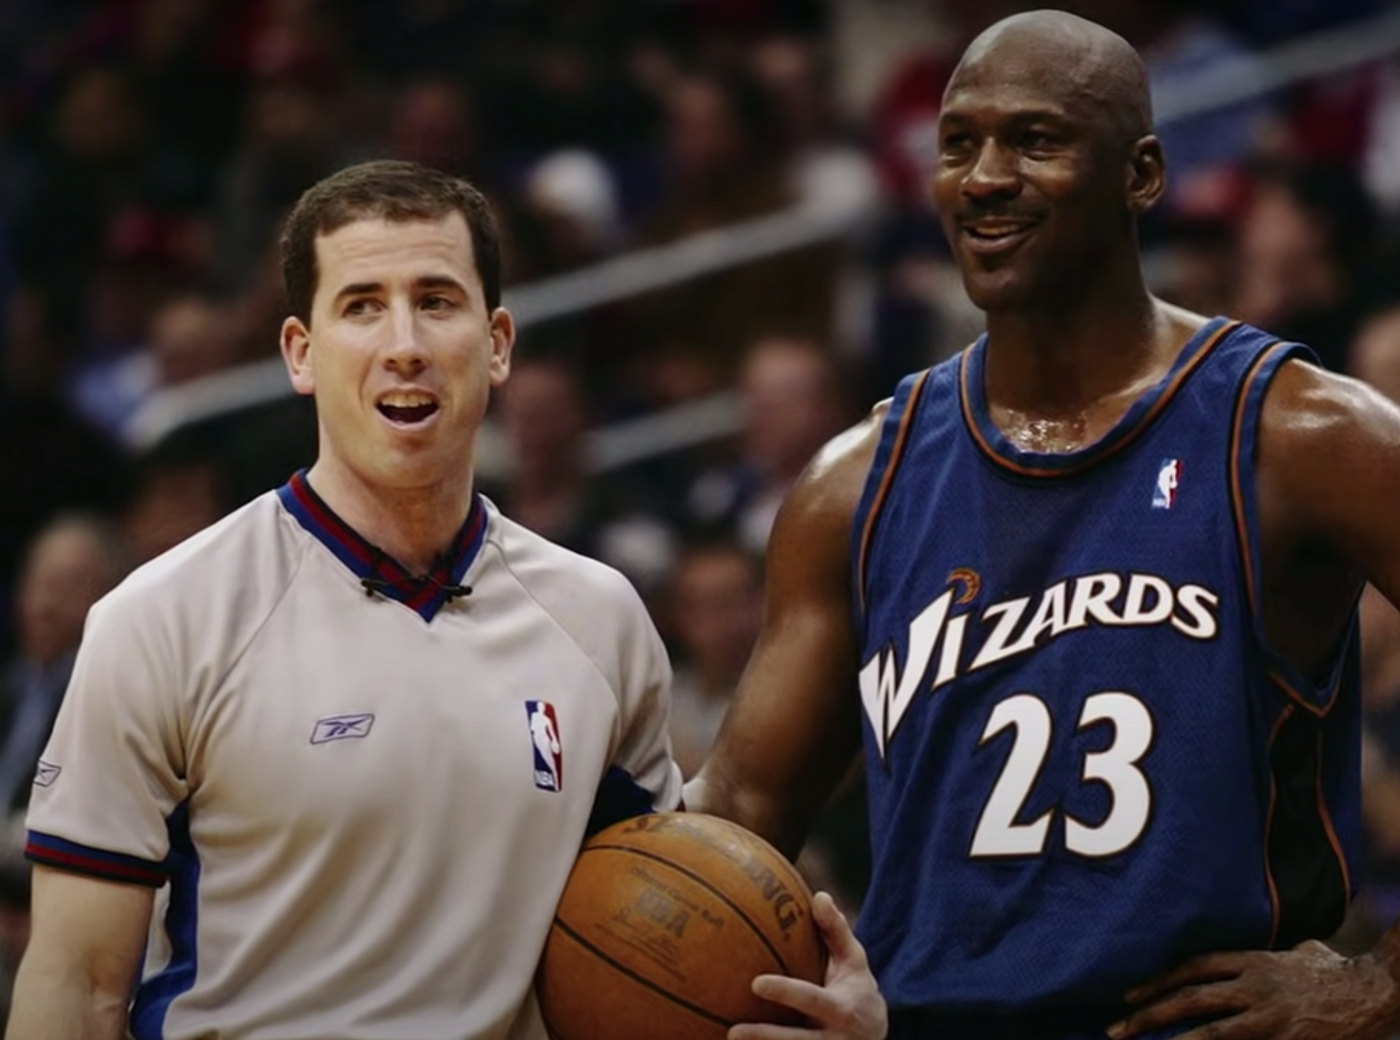 Disgraced NBA referee Tim Donaghy set to officiate in professional